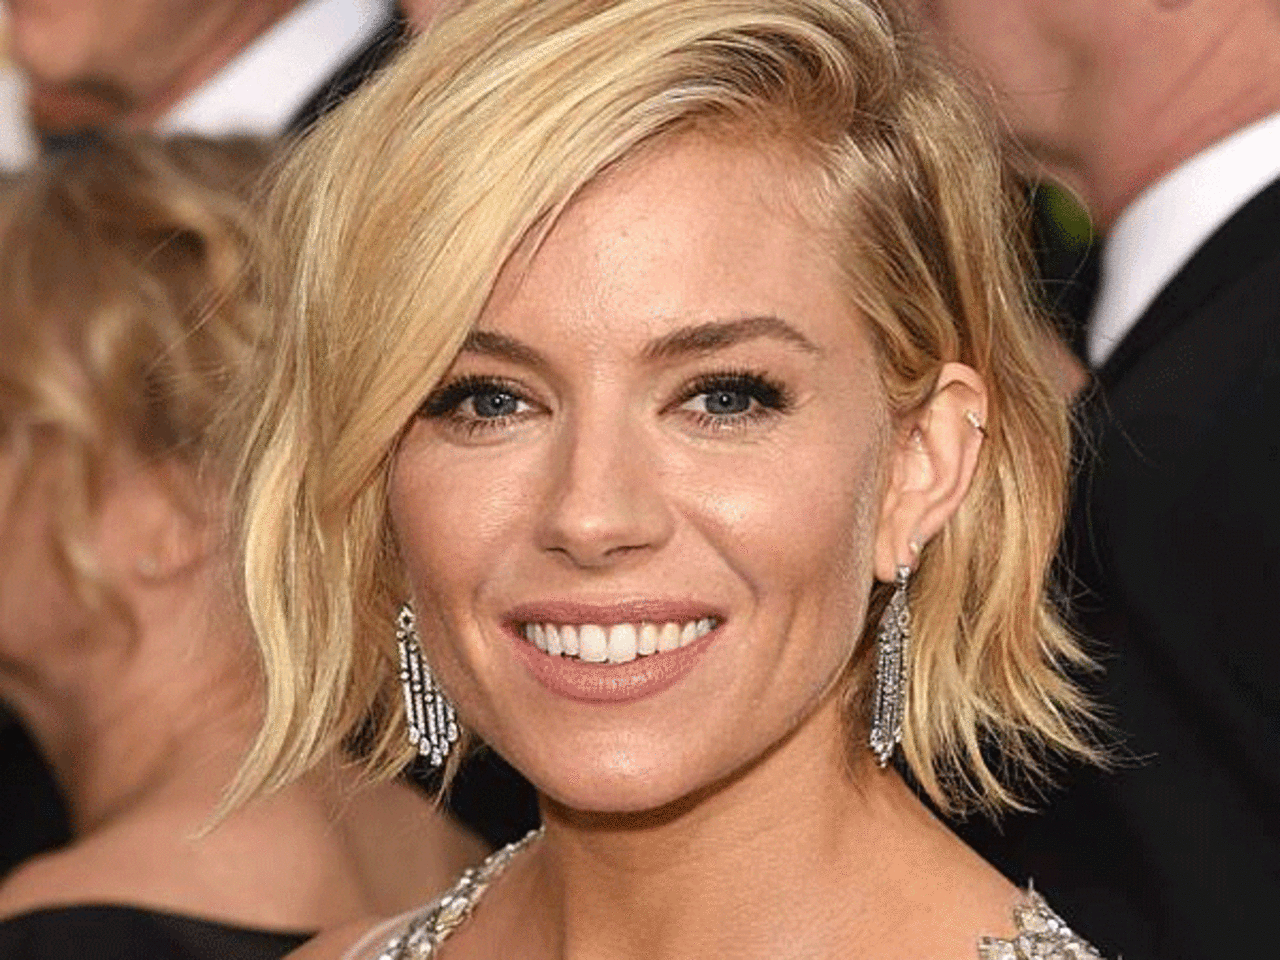 Hollywood actress nude pics leaked: ​Sienna Miller's nude pictures ...